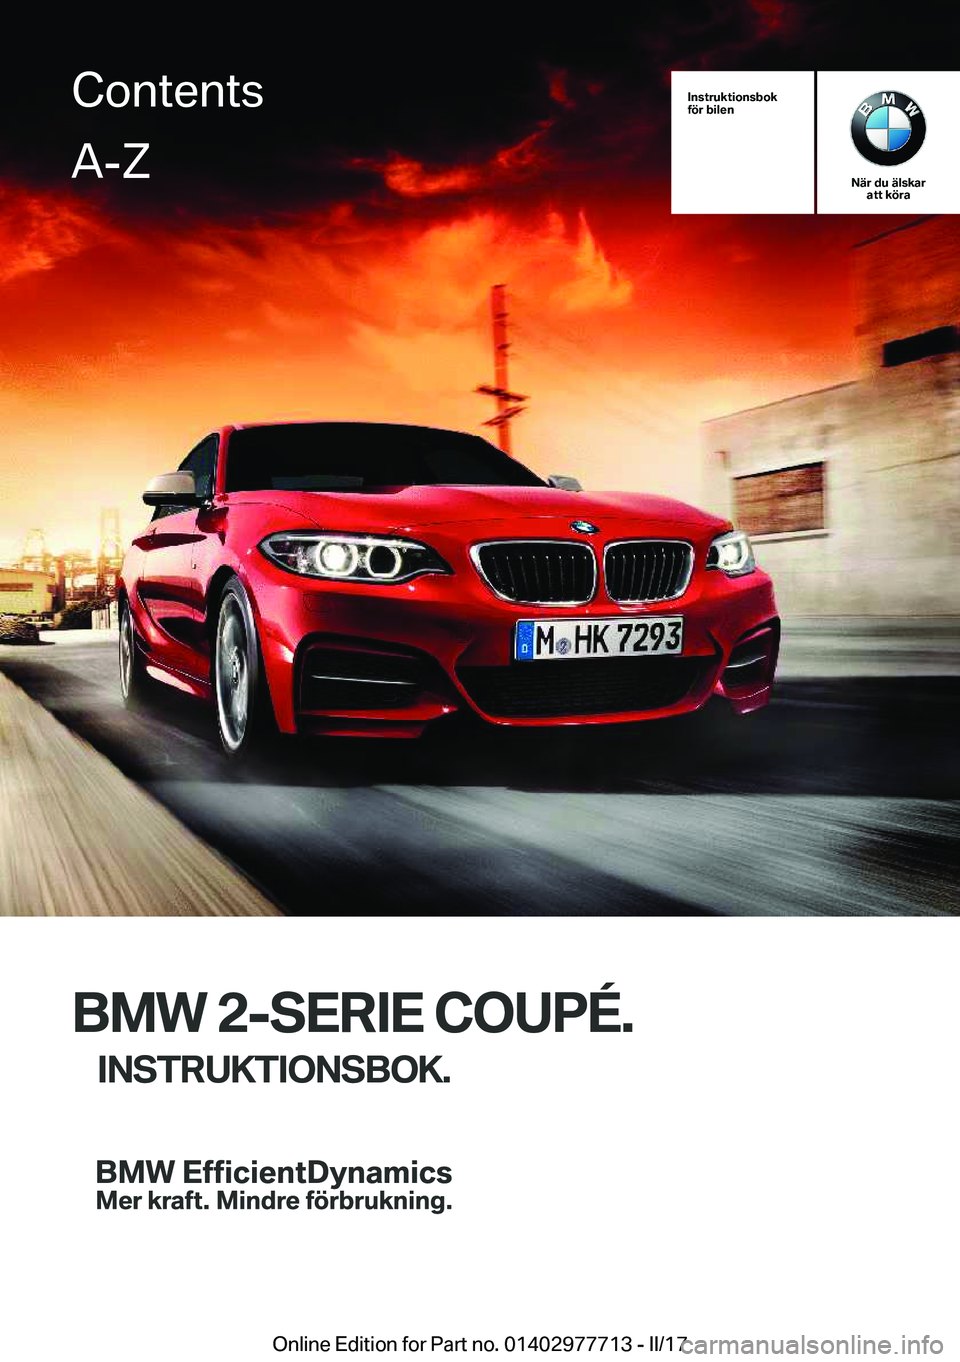 BMW 2 SERIES COUPE 2017  InstruktionsbÖcker (in Swedish) �I�n�s�t�r�u�k�t�i�o�n�s�b�o�k
�f�